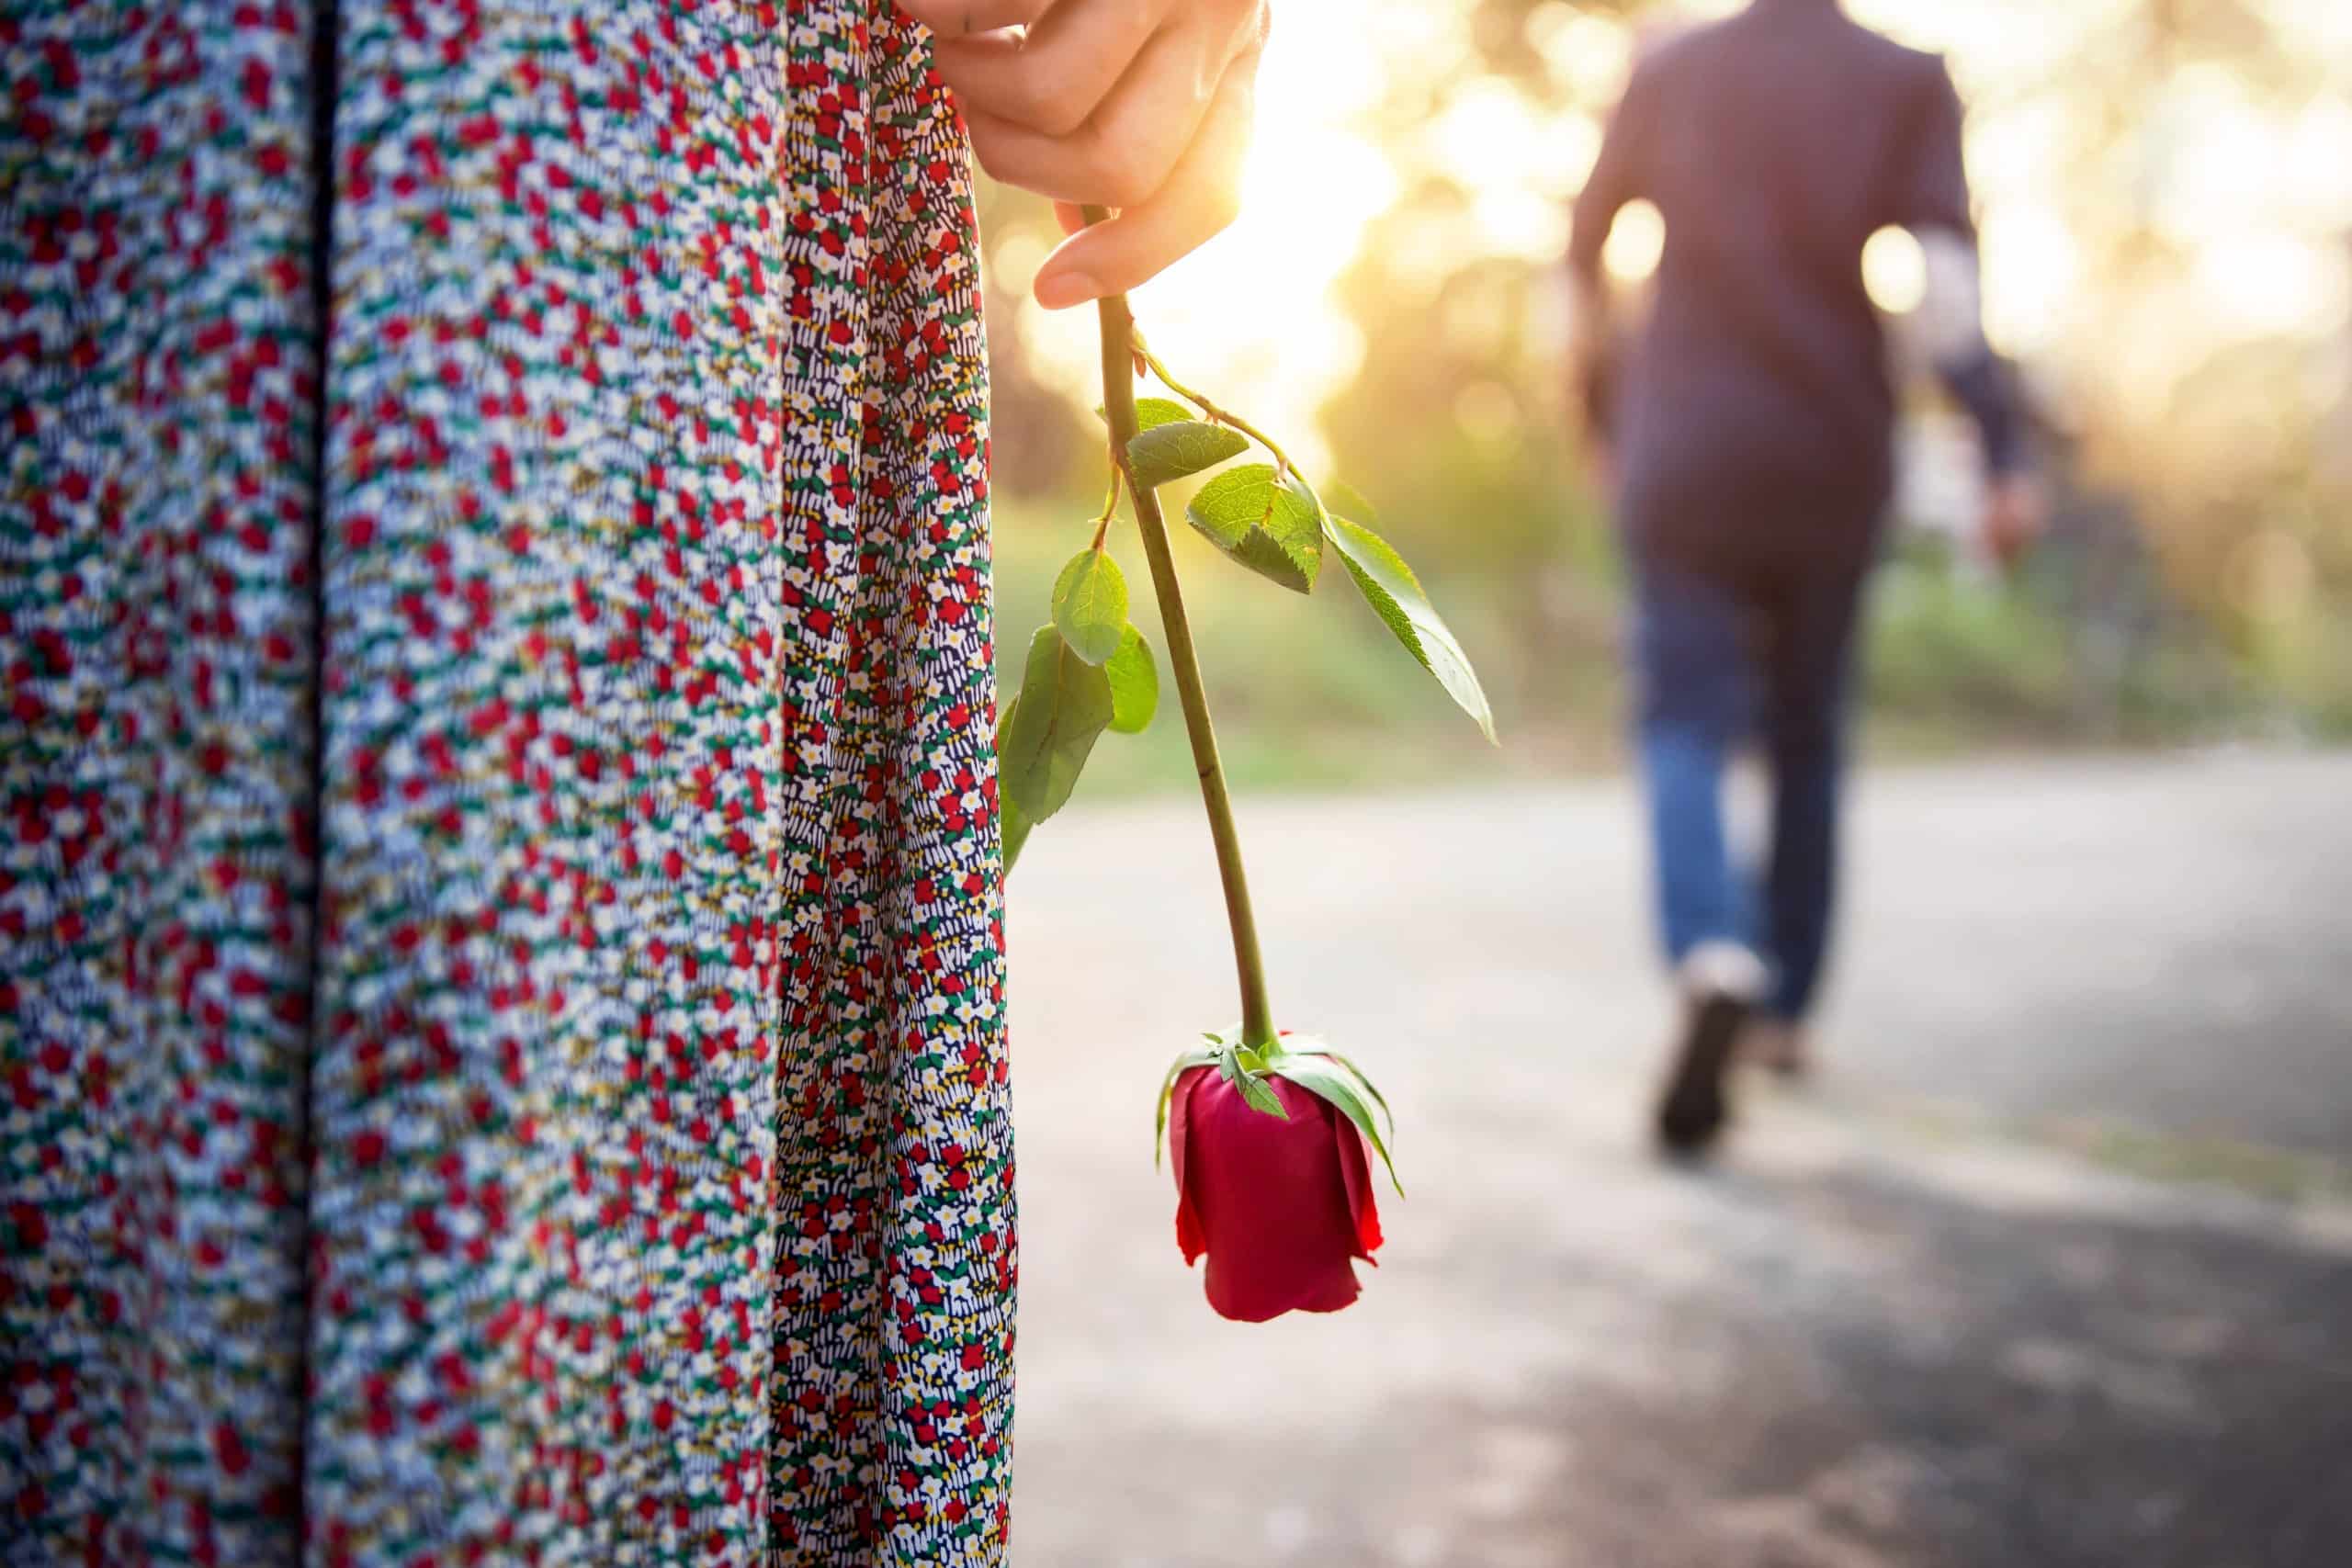 Man walking away, woman arms down standing behind with a rose in hand